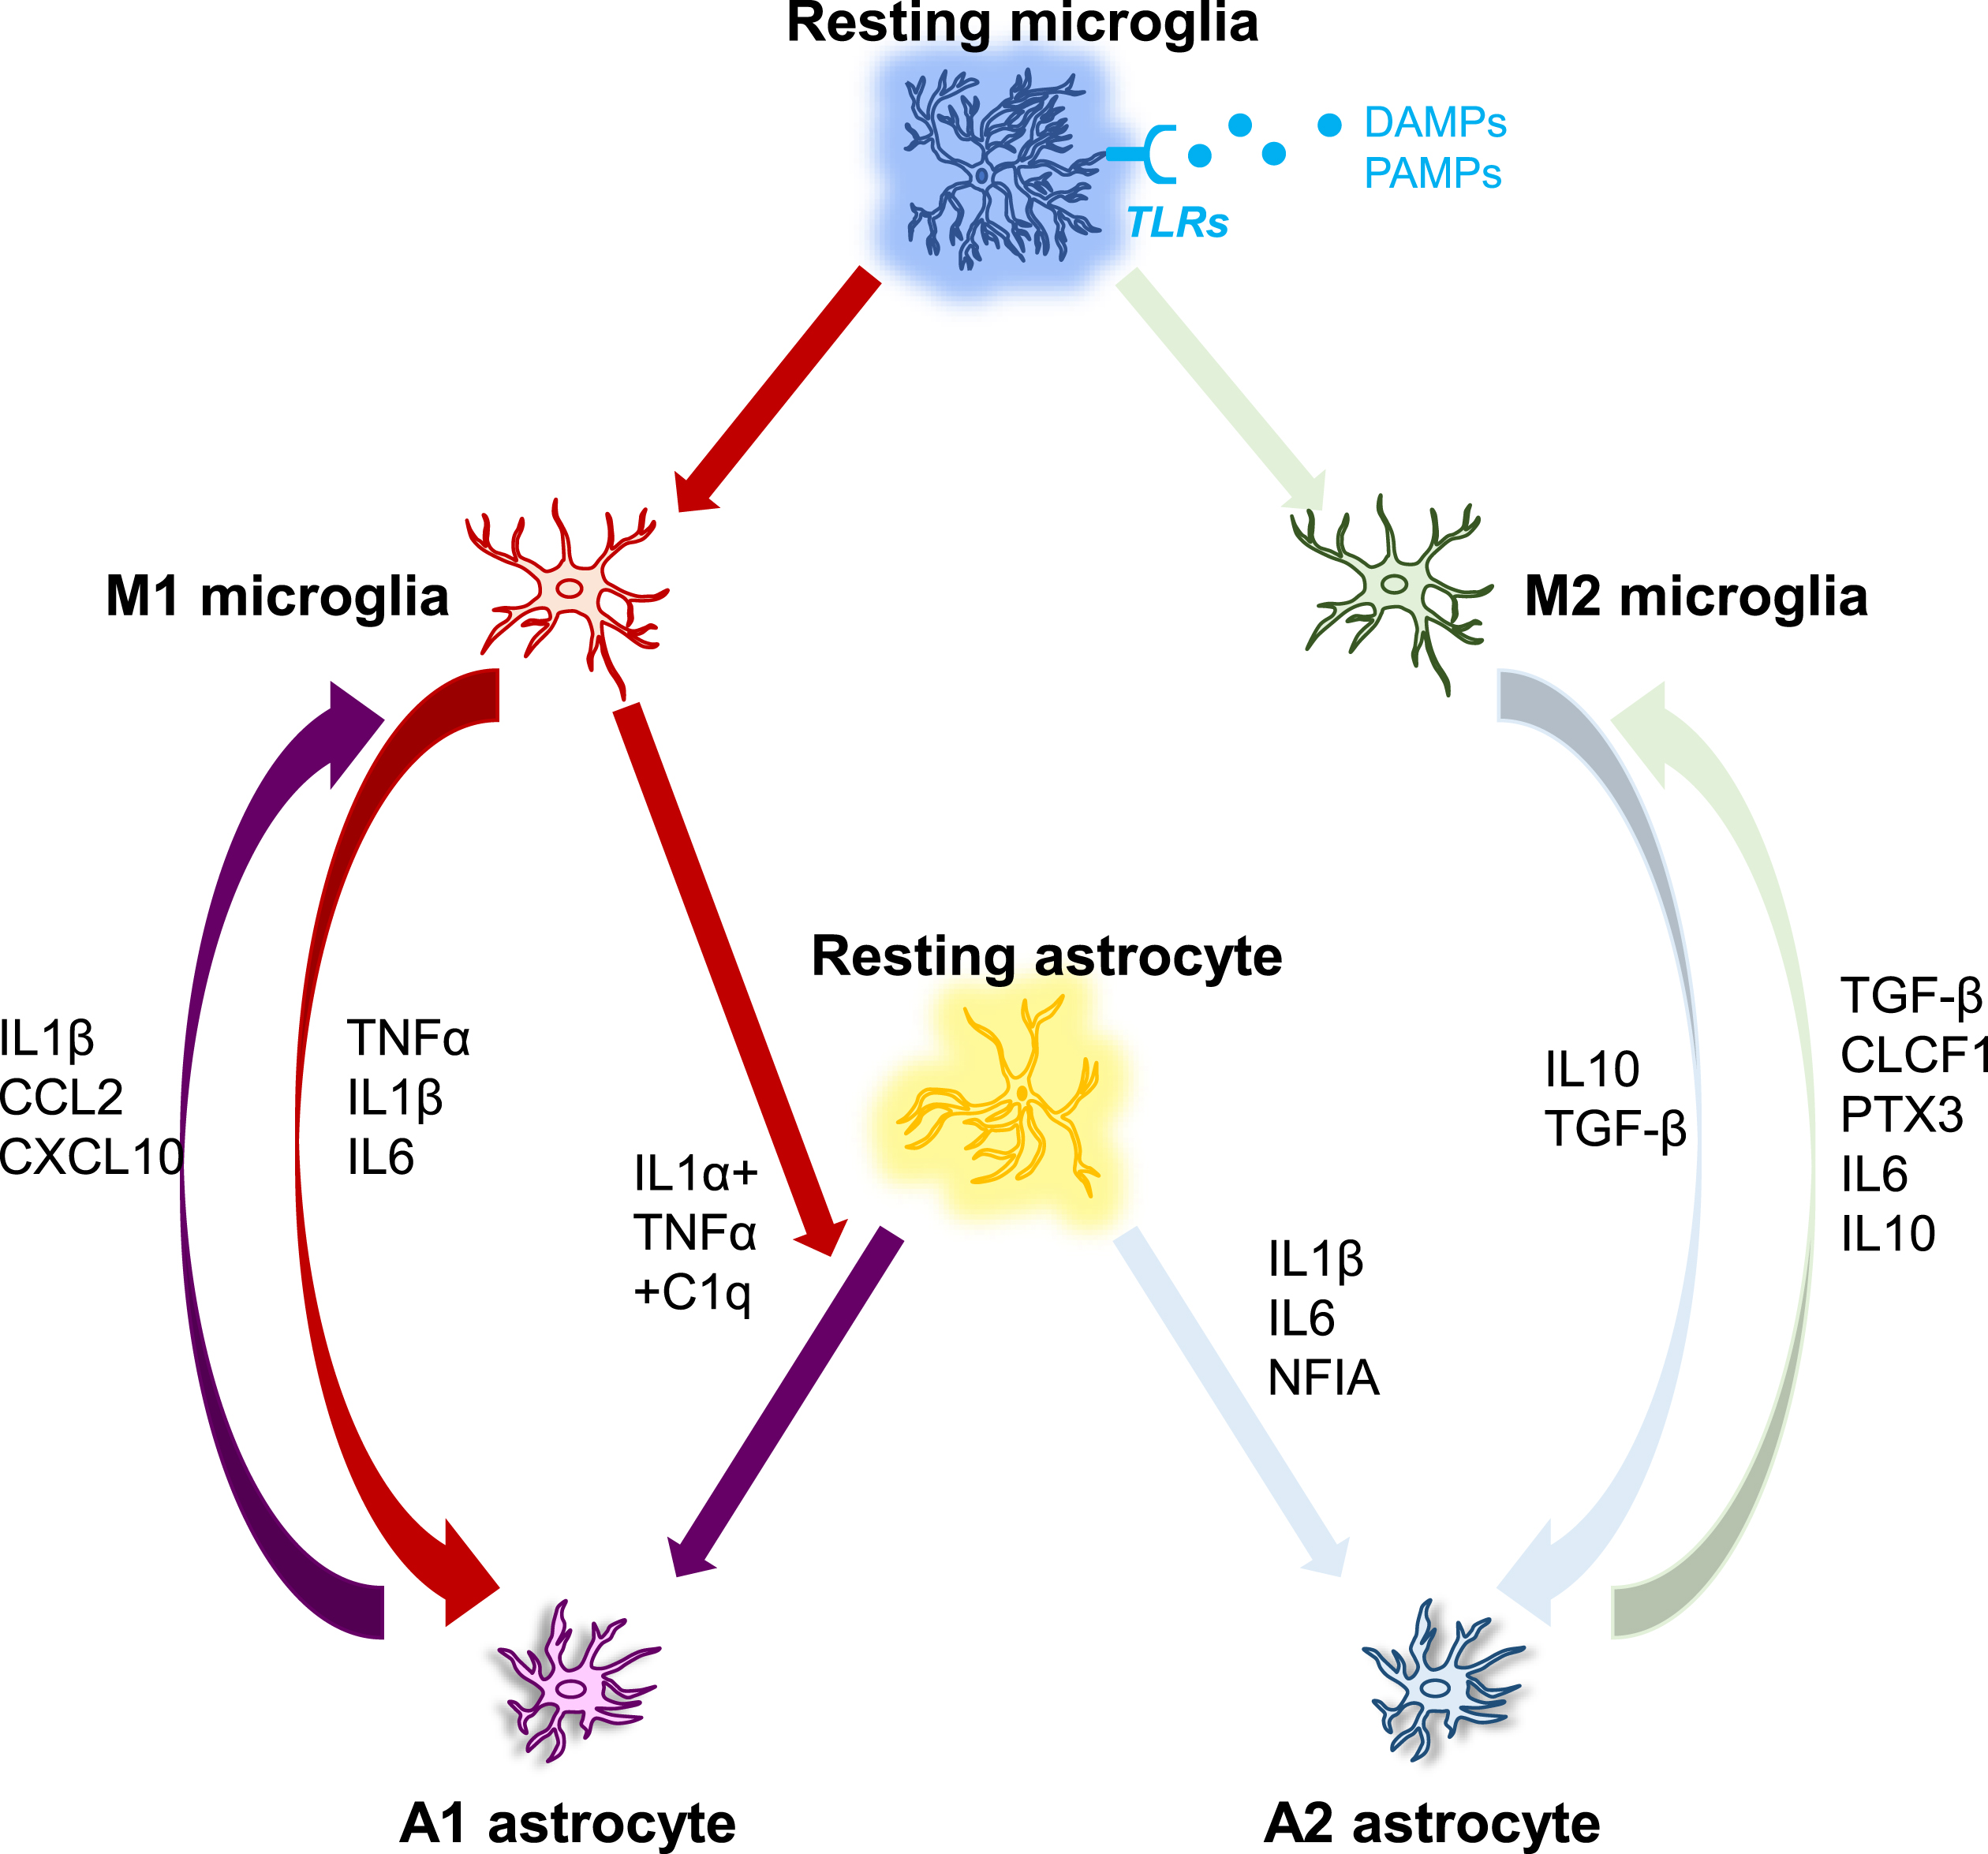 The interplay between microglia and astrocytes. DAMP/PAMP signaling activates microglia via TLR receptors, which then regulate the phenotypes of astrocytes, which can range from neurotoxic to neuroprotective. Microglia and astrocytes can have a direct effect on each other via numerous molecules as demonstrated in Fig. 2. C1q, Complement component 1q; CCL2, C-C motif ligand 2; CLCF1, Cardiotrophin-like cytokine factor 1; CXCL10, C-X-C, motif chemokine ligand 10; IFN-γ, Interferon gamma; IL, Interleukin; NFIA, Nuclear factor IA; PTX3, Pentraxin 3; TGF-β, Transforming growth factor-beta 1; TNFα, Tumor necrosis factor alpha.